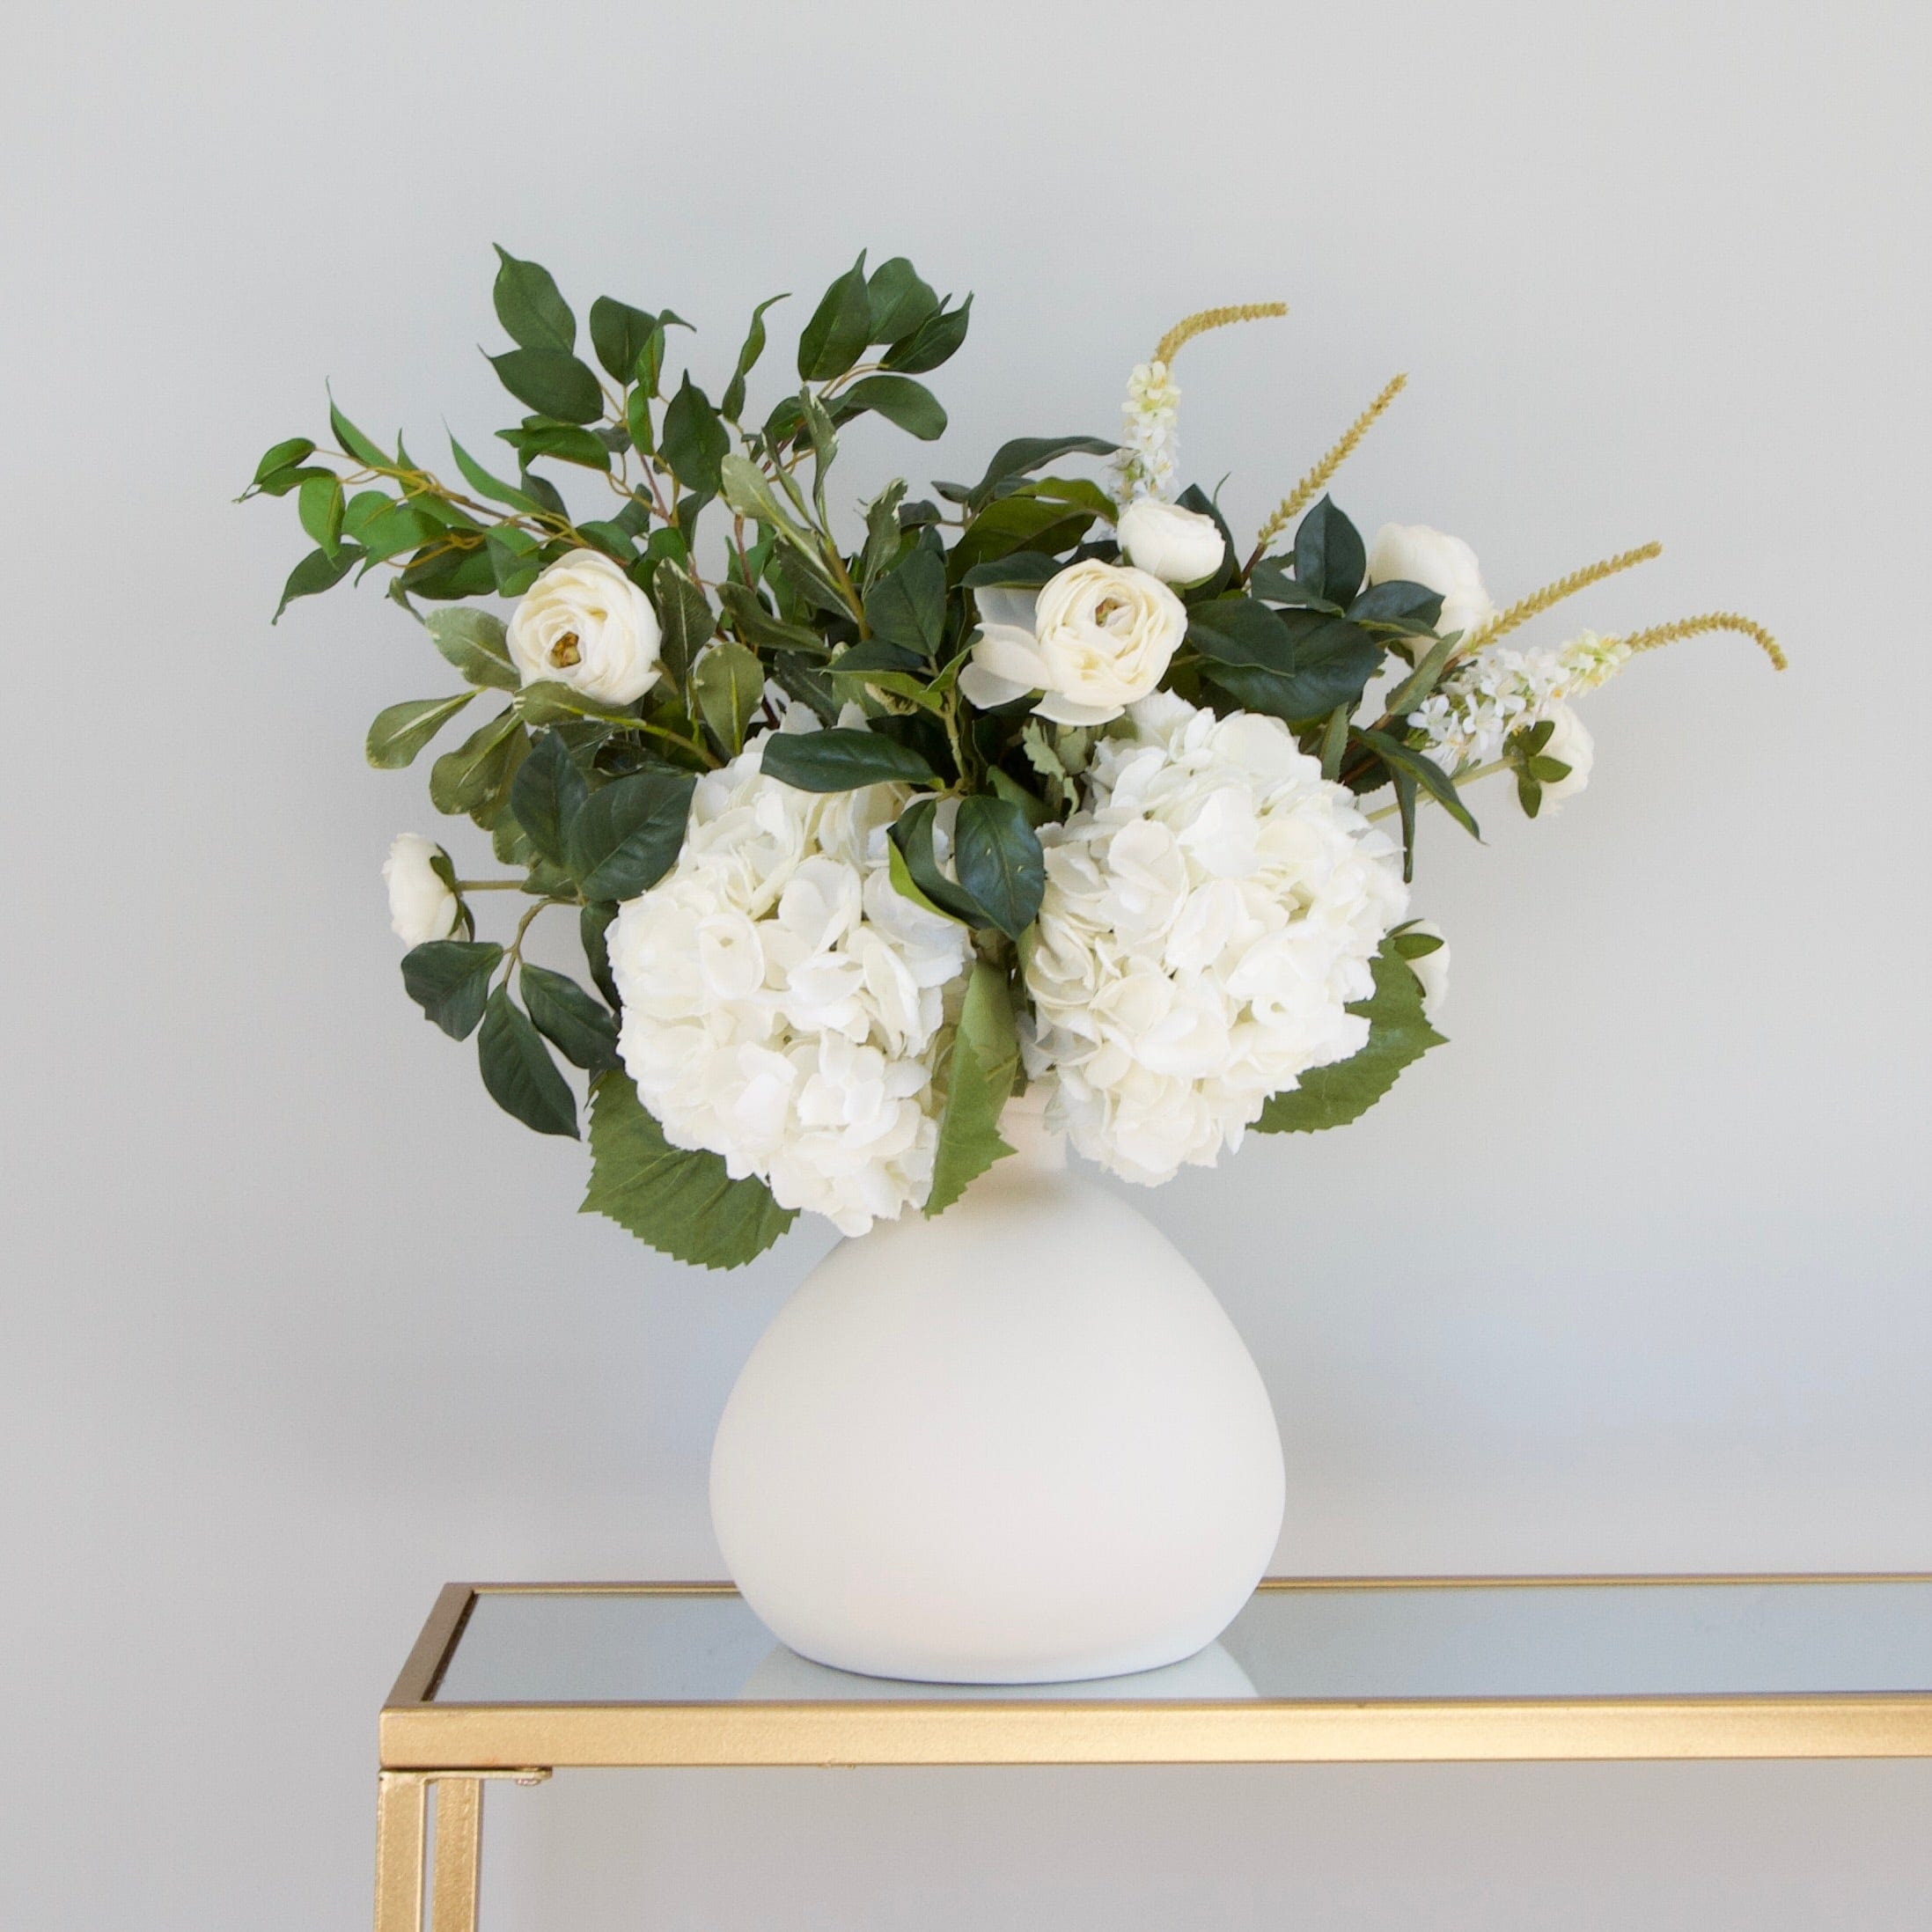 Luxury Lifelike Realistic Artificial Fabric Silk Blooms with Foliage Buy Online from The Faux Flower Company | Evergreen Arrangement in Burford Vase ABP1747